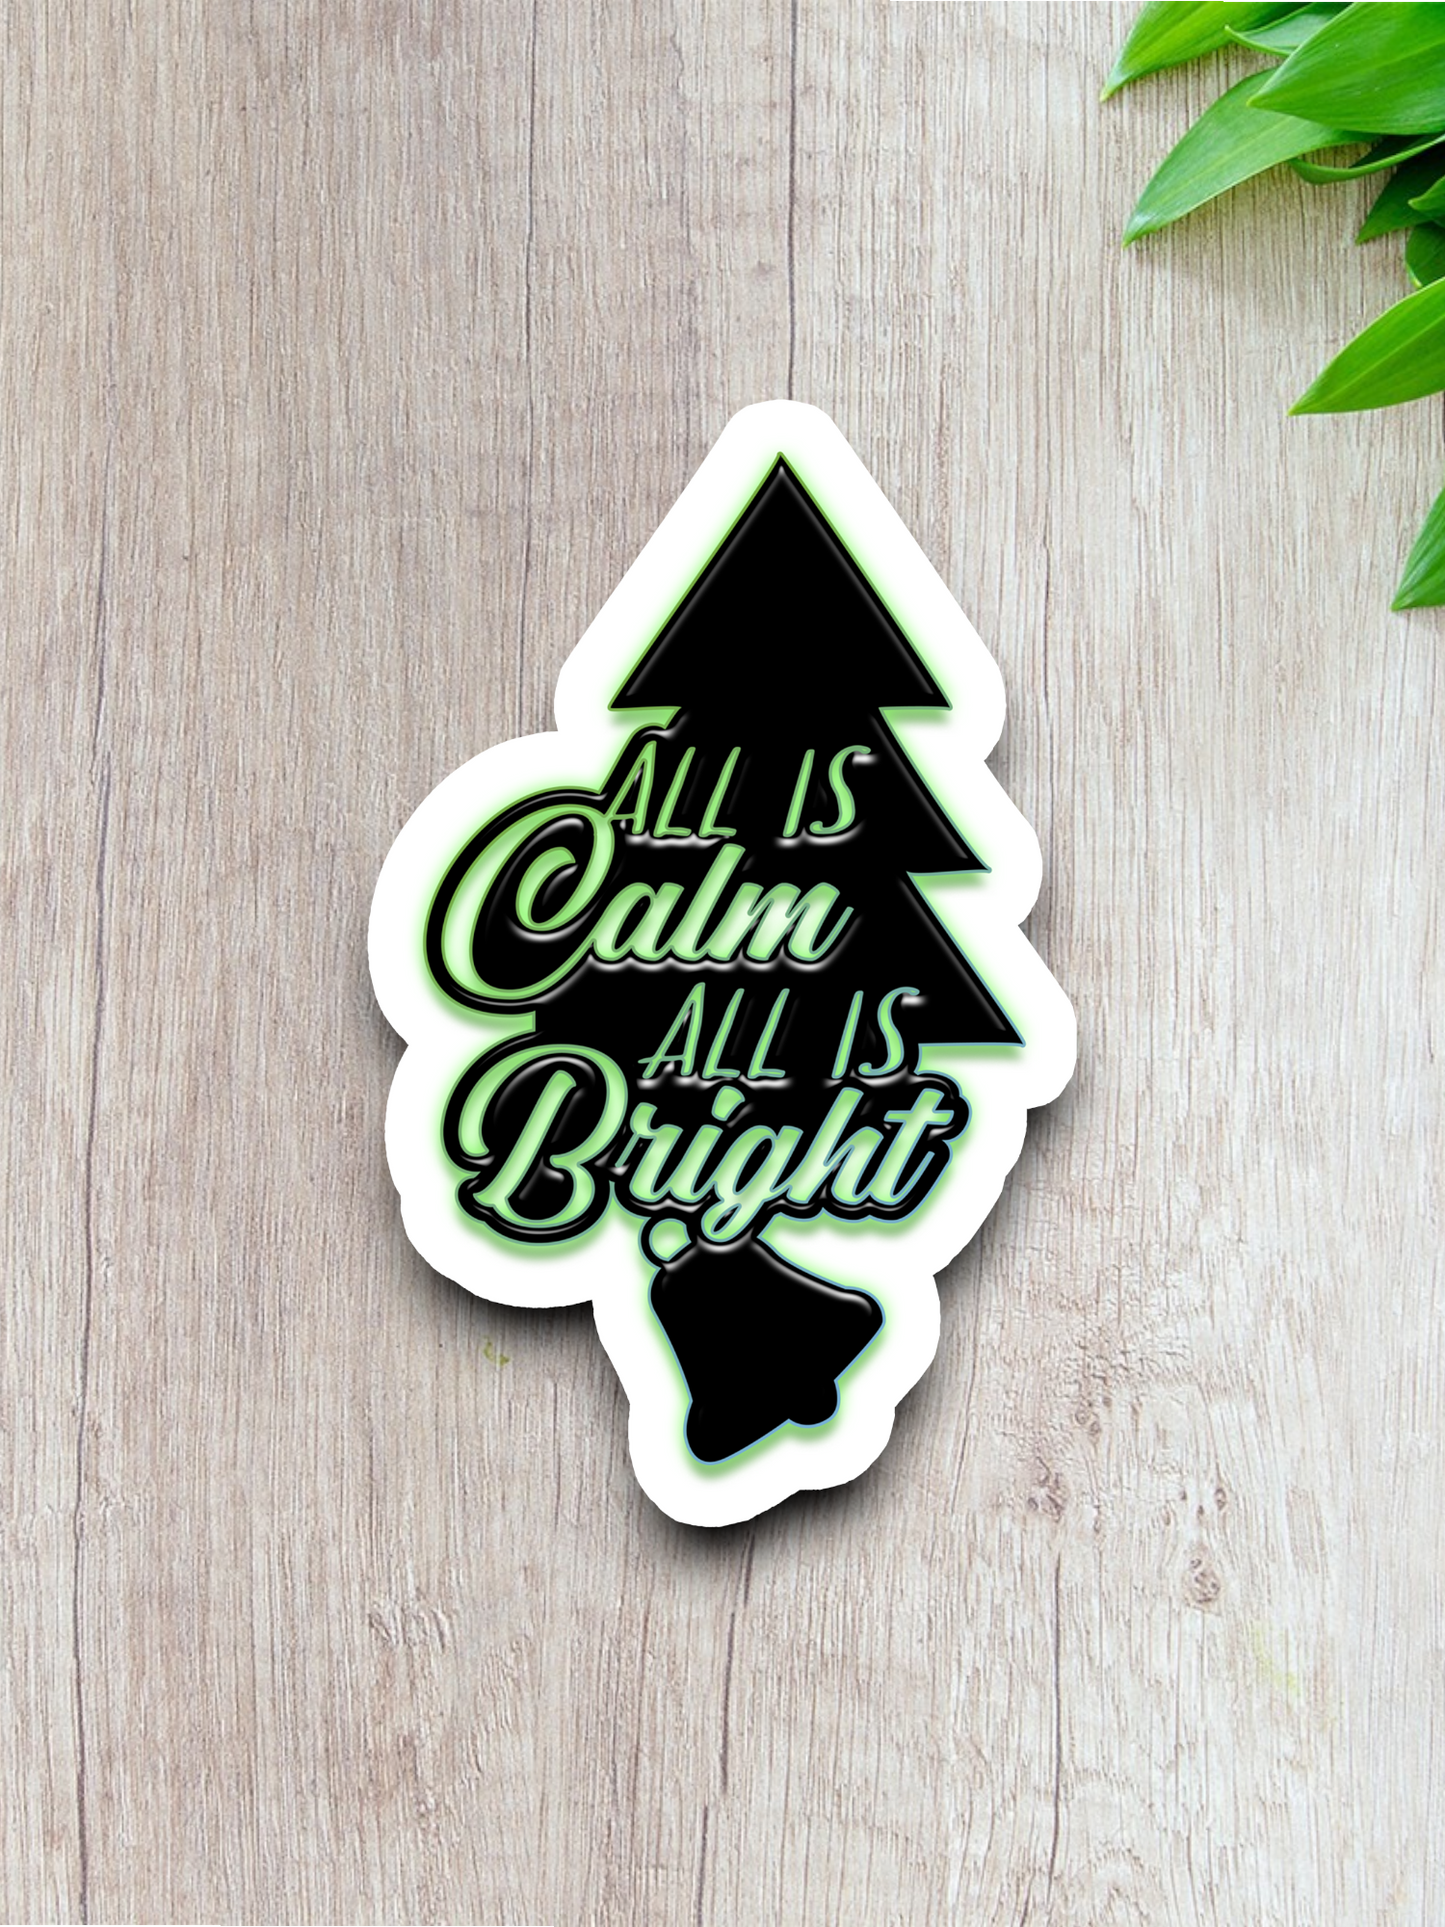 All is Calm All is Bright - Holiday Sticker